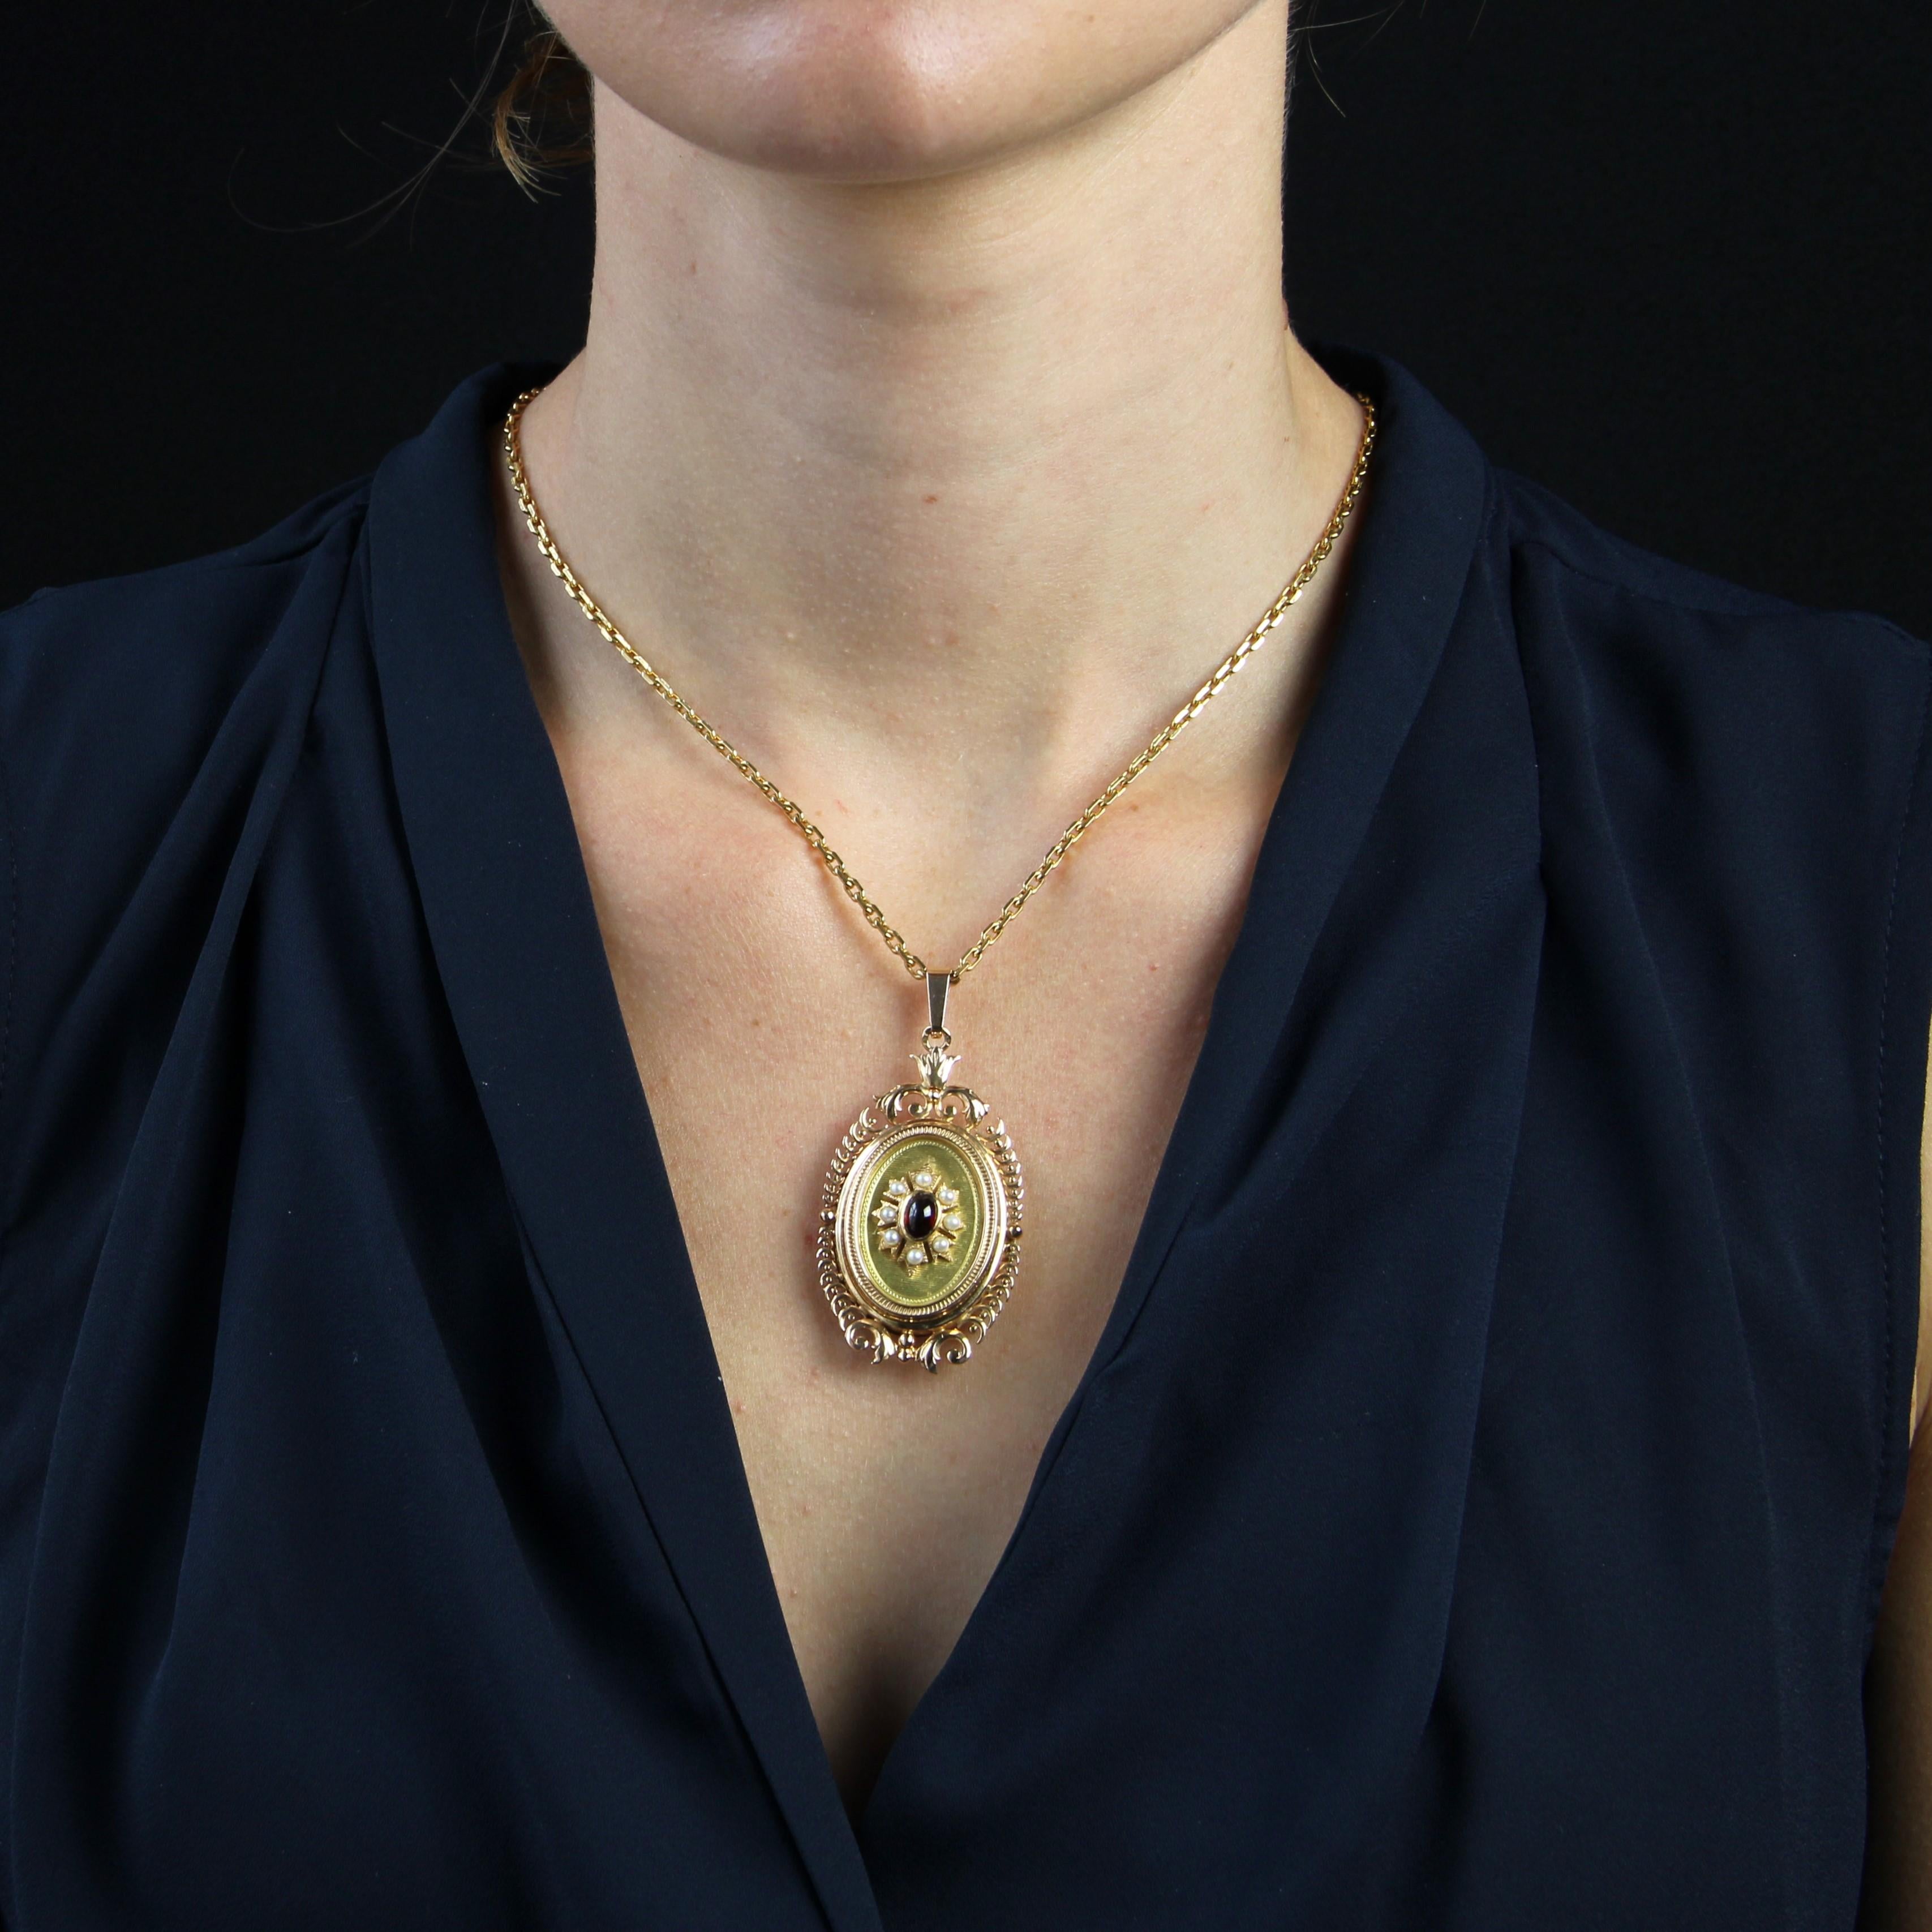 Pendant in 18 karat yellow gold pendant, eagle head hallmark.
This oval medallion pendant is bordered with arabesque and acanthus leaf motifs. It opens with a hinge on the side to accommodate a keepsake. The front is adorned with an applique floral